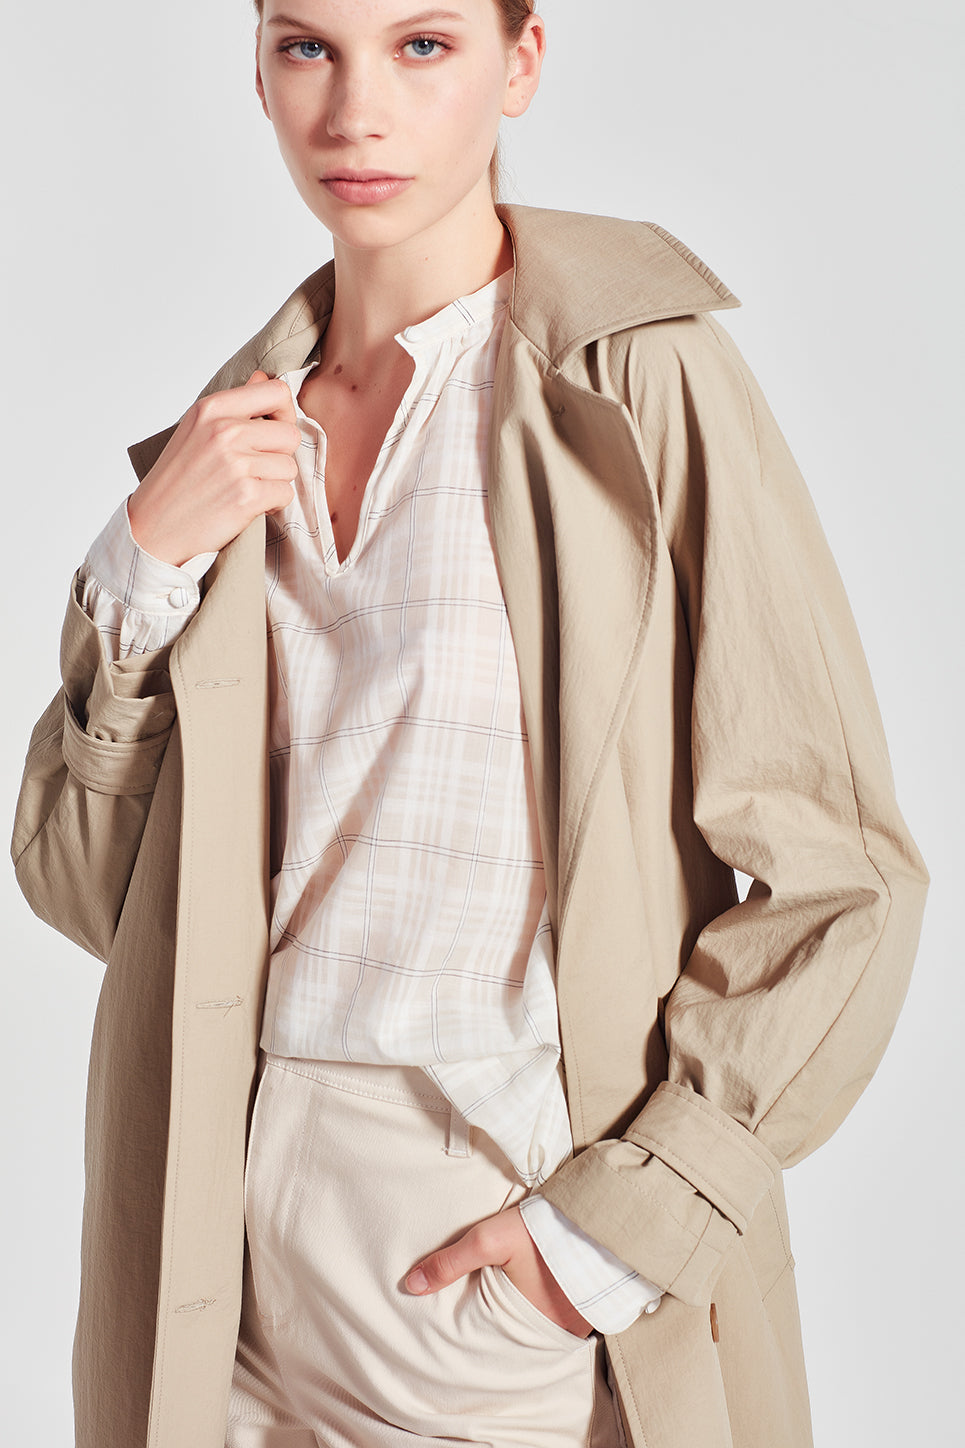 The Kingsly Coat in Taupe